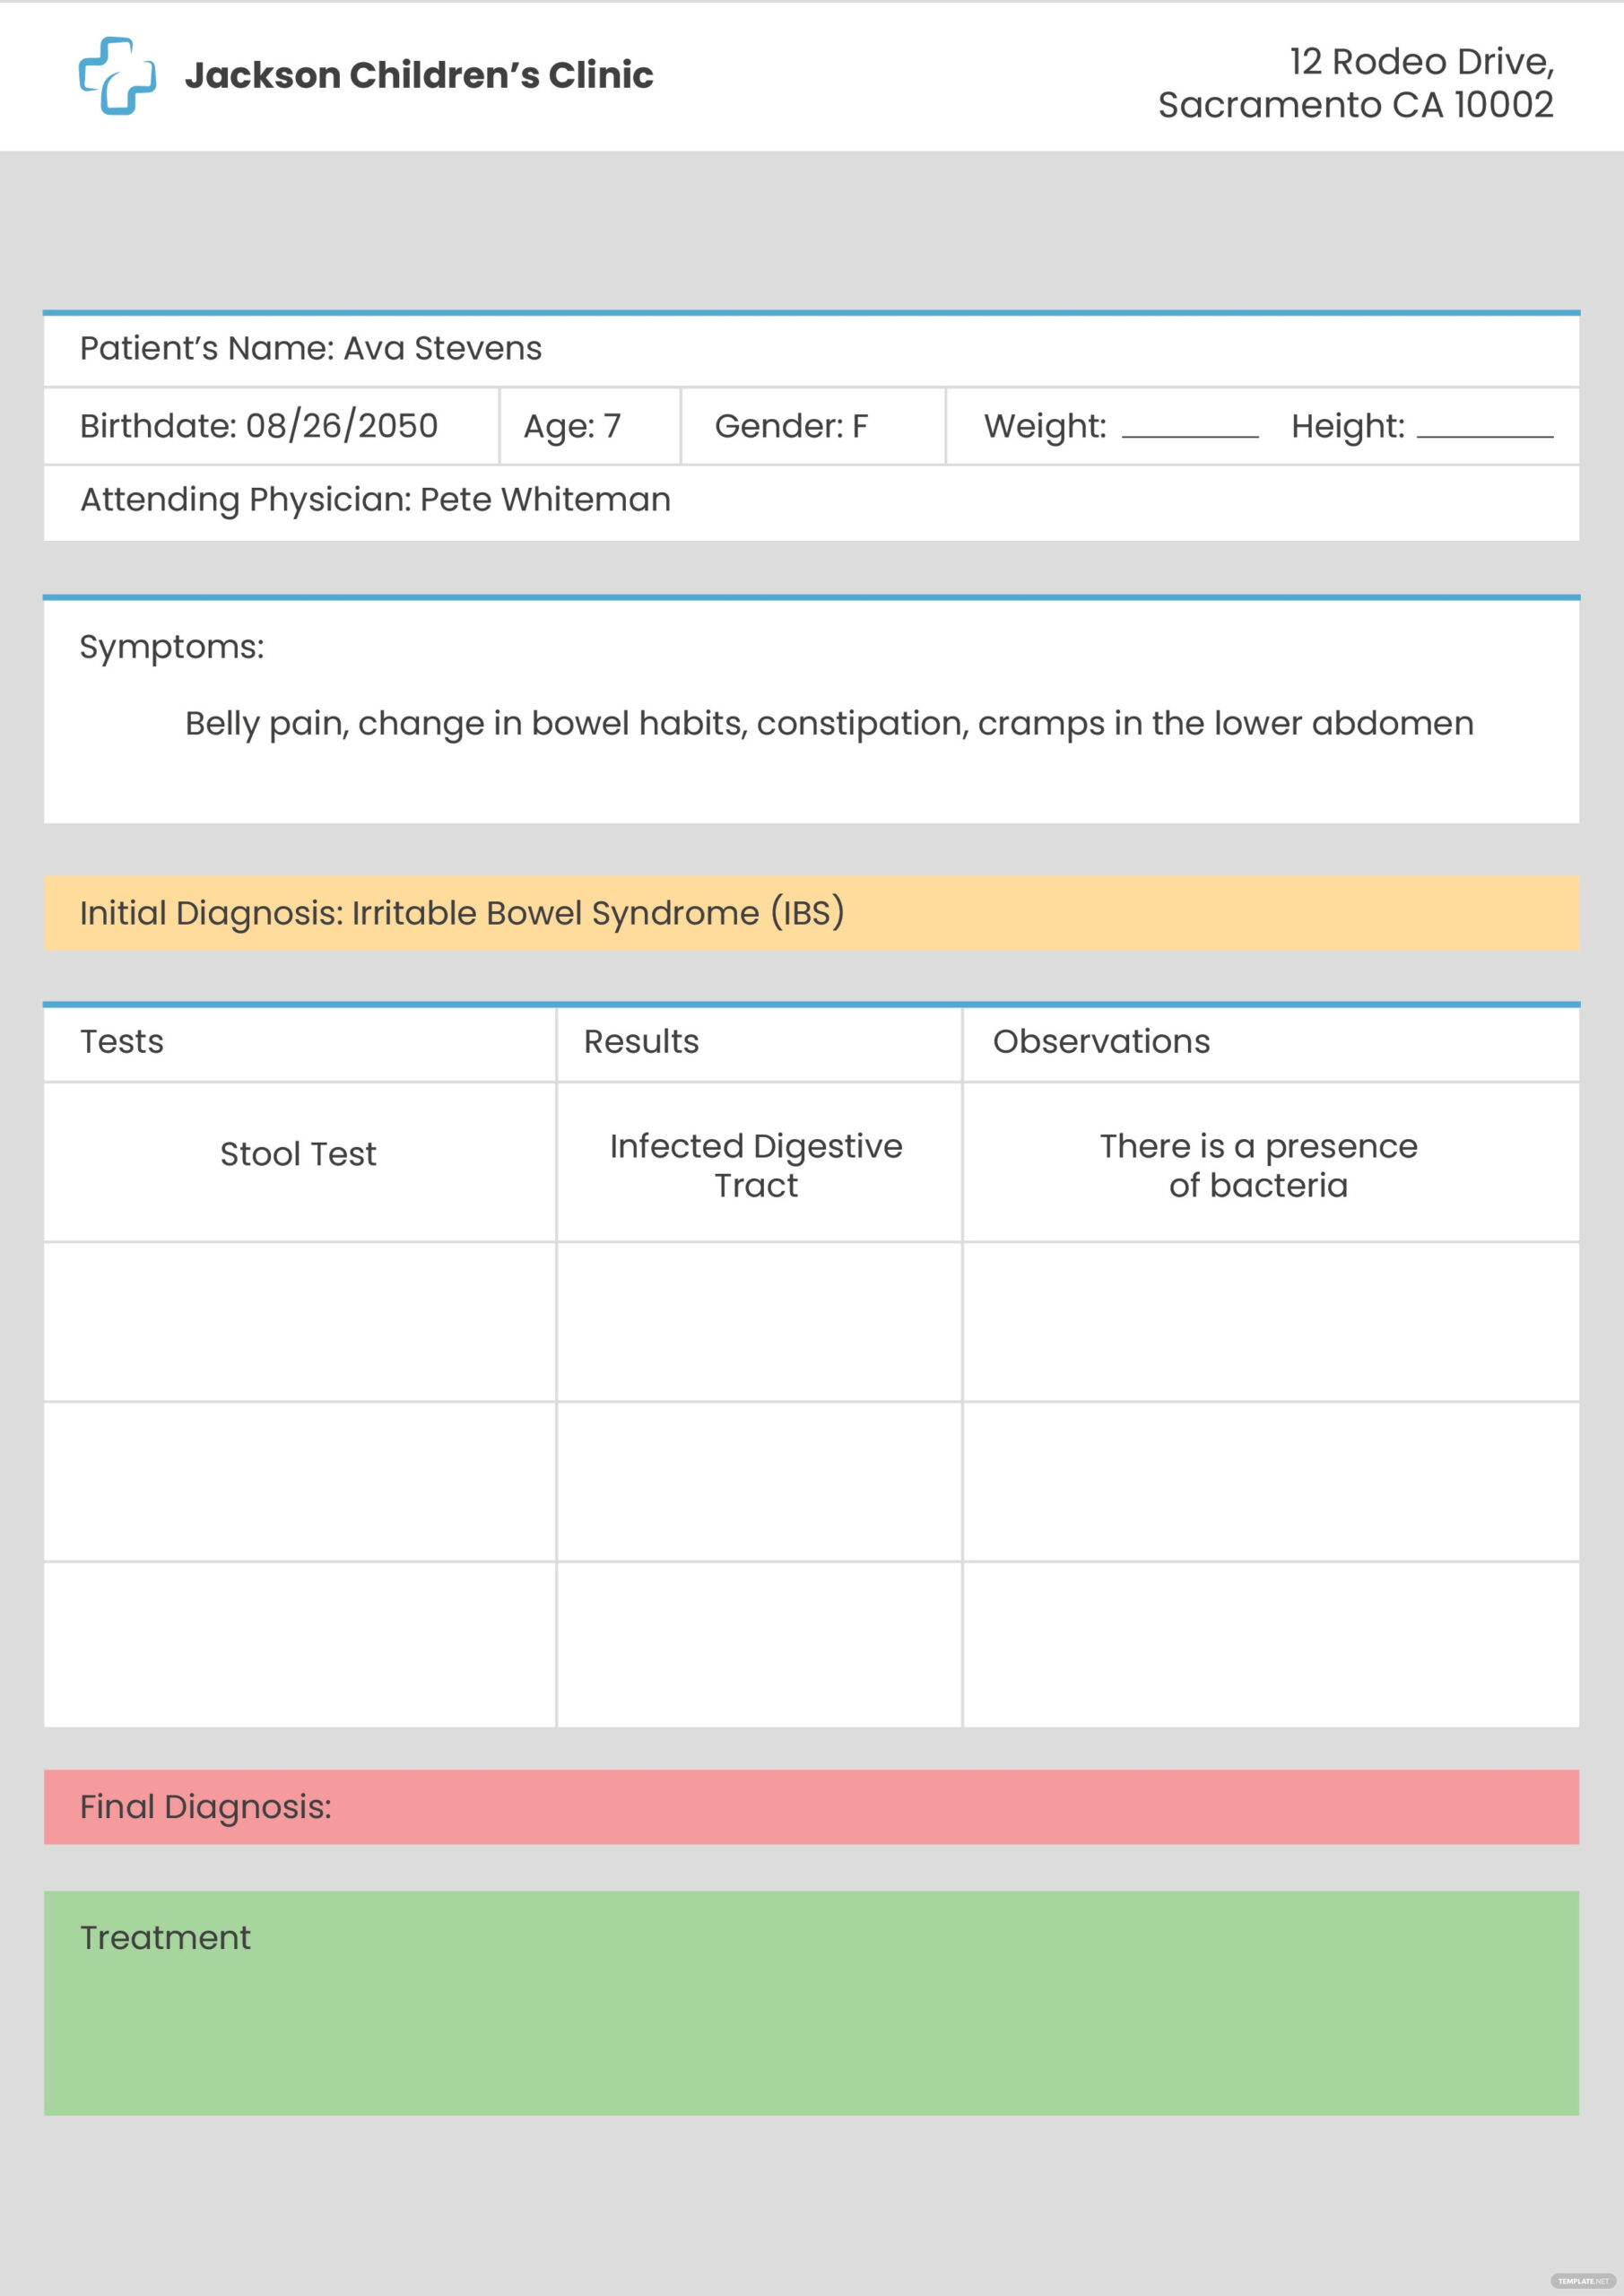 Medical Report Templates - Format, Free, Download  Template.net